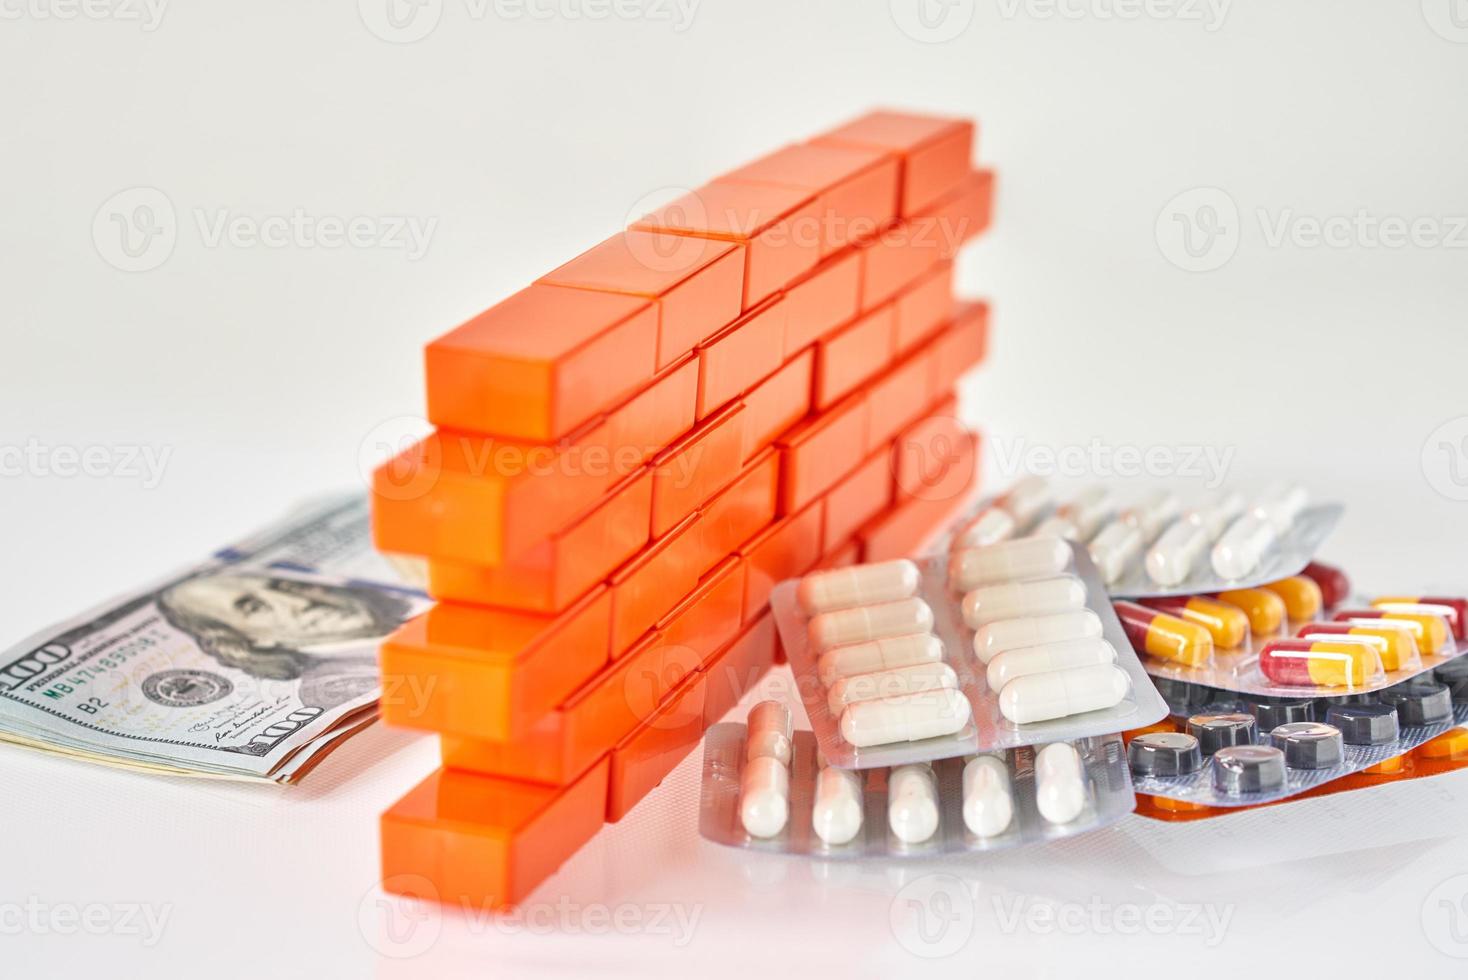 Medical pills and dollar bills money separate with a toy brick wall photo